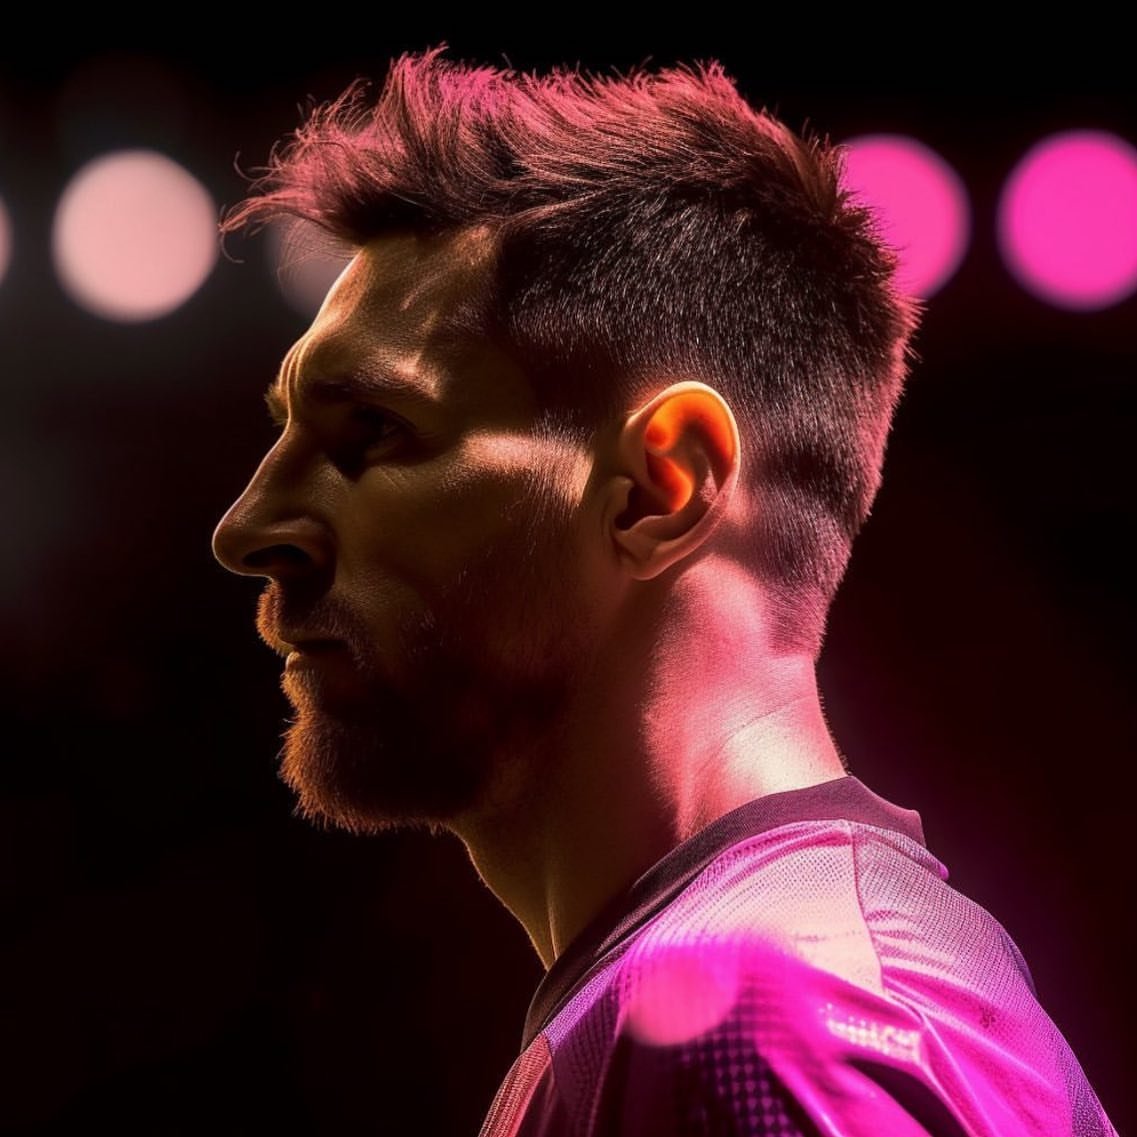 Lionel Messi says he's taking his talents to Inter Miami - Axios Miami